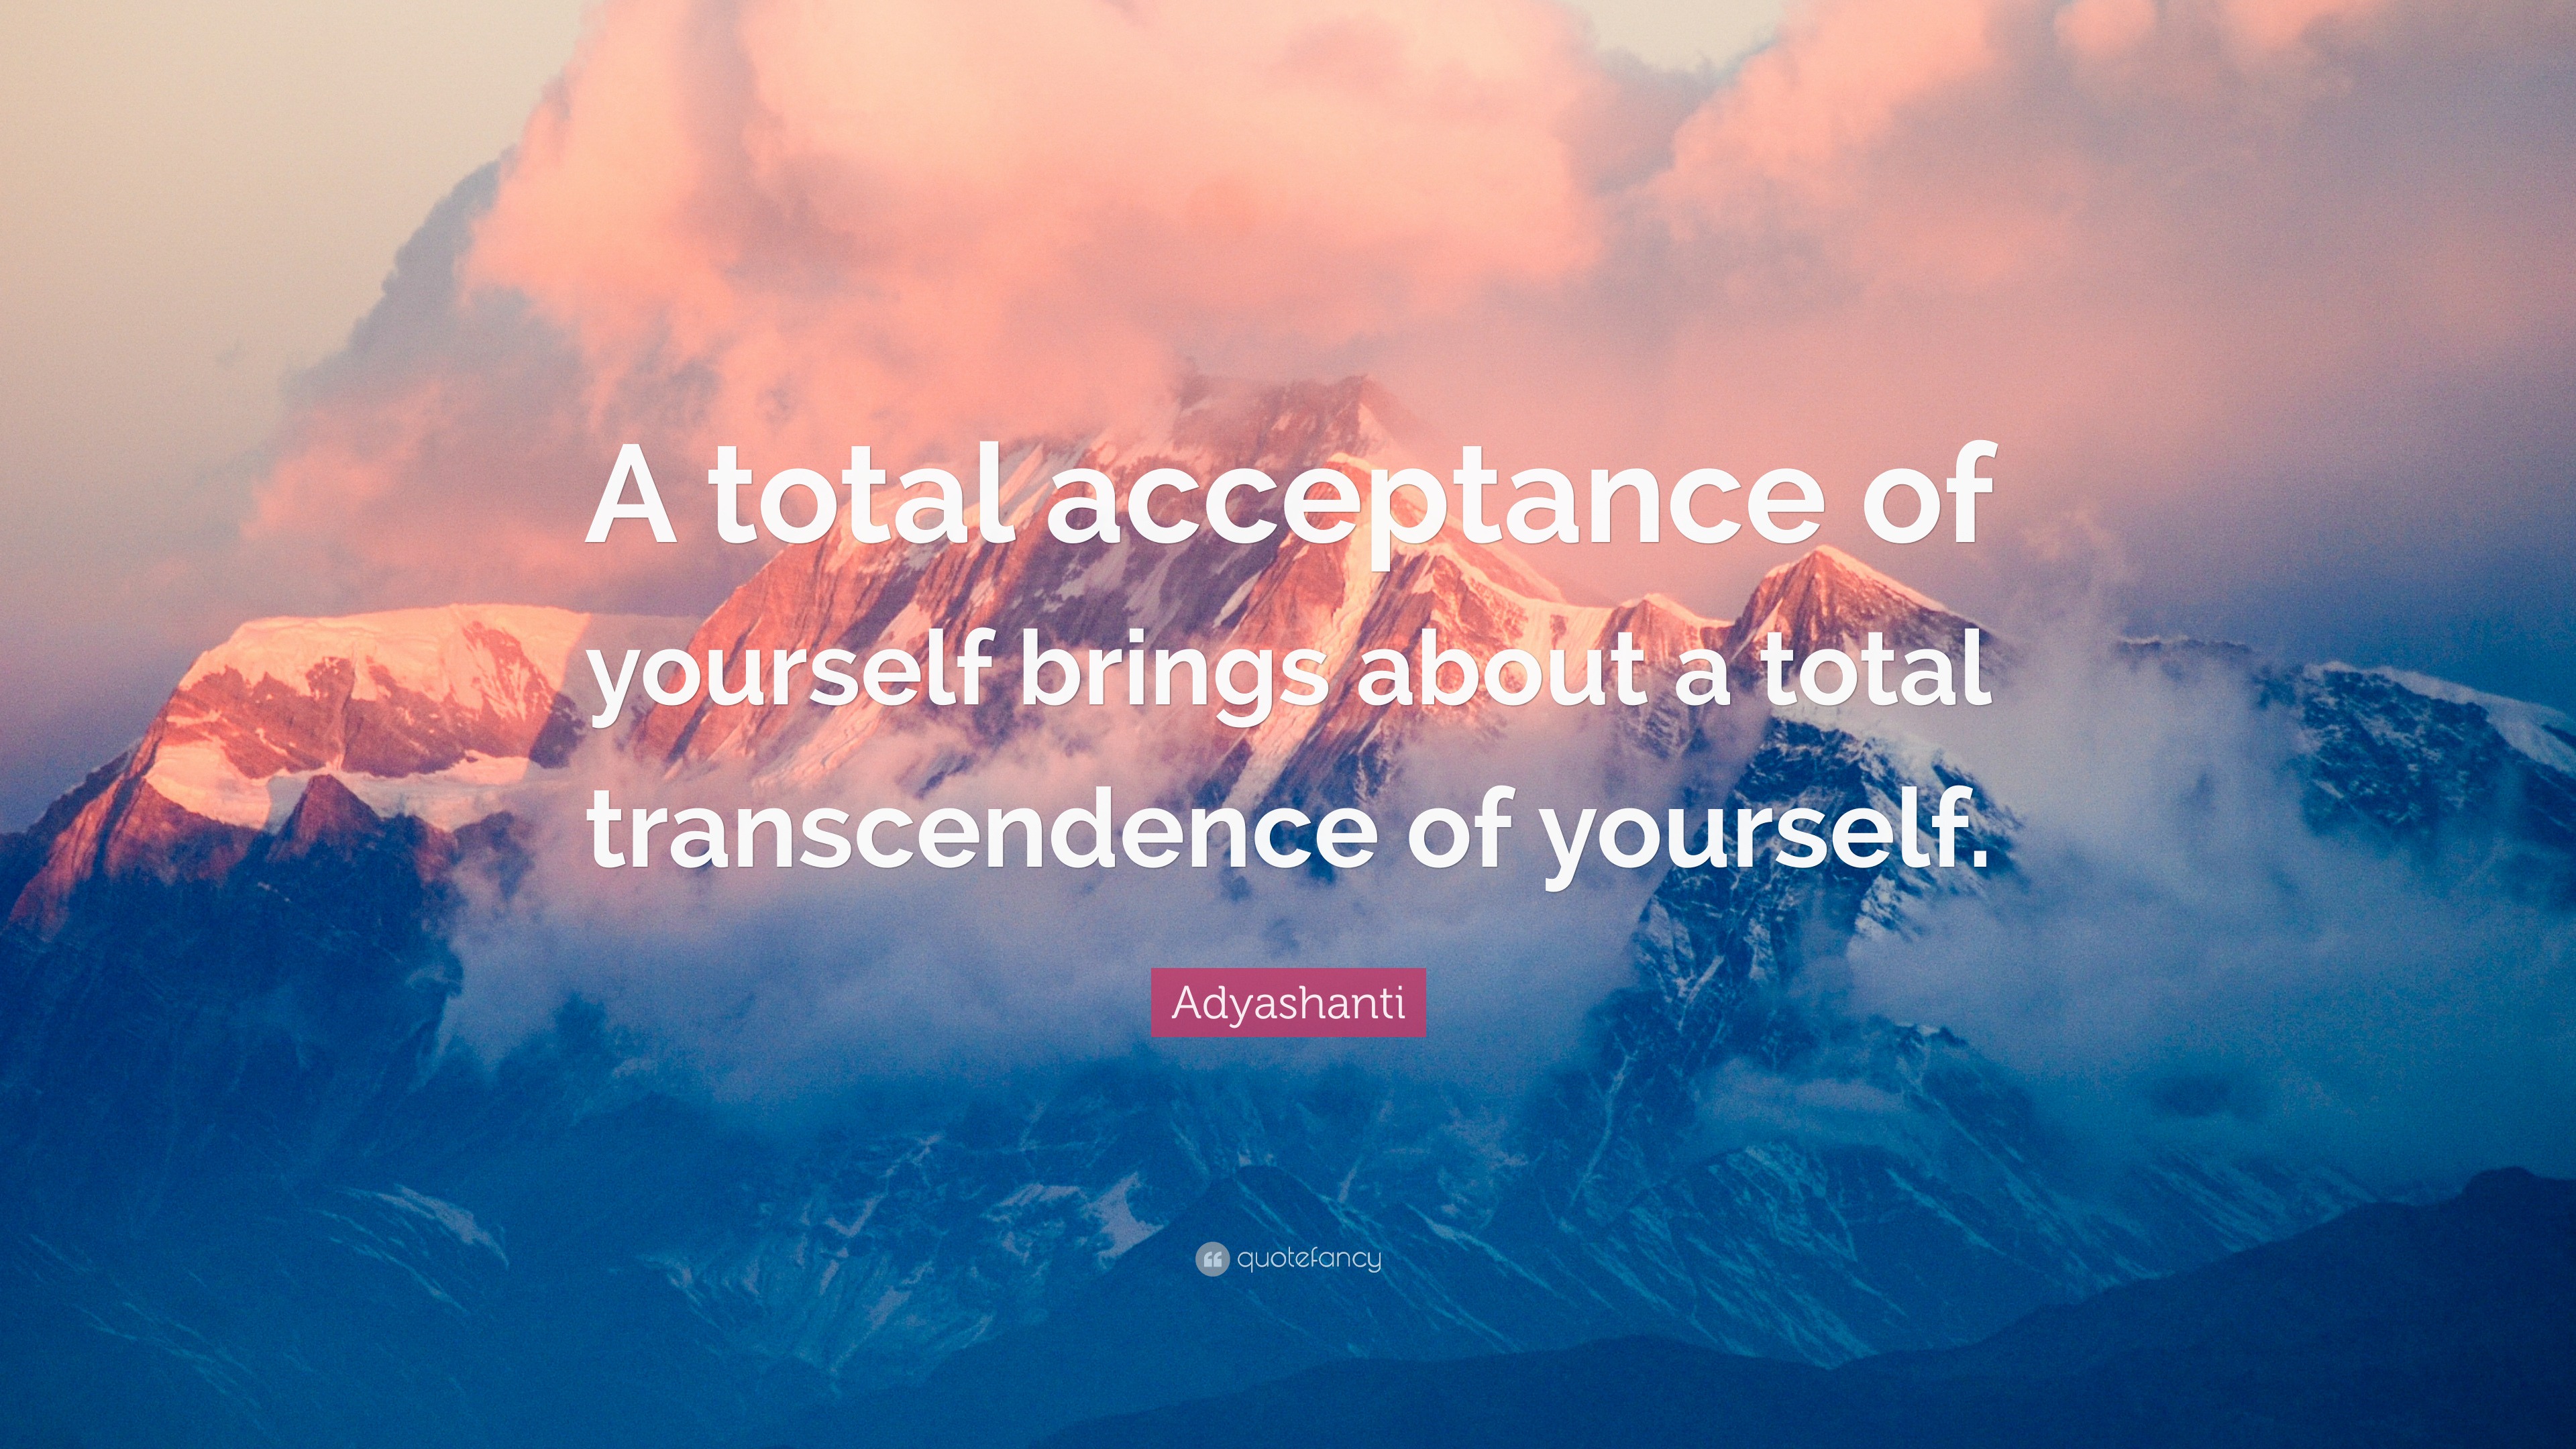 Adyashanti Quote: “A total acceptance